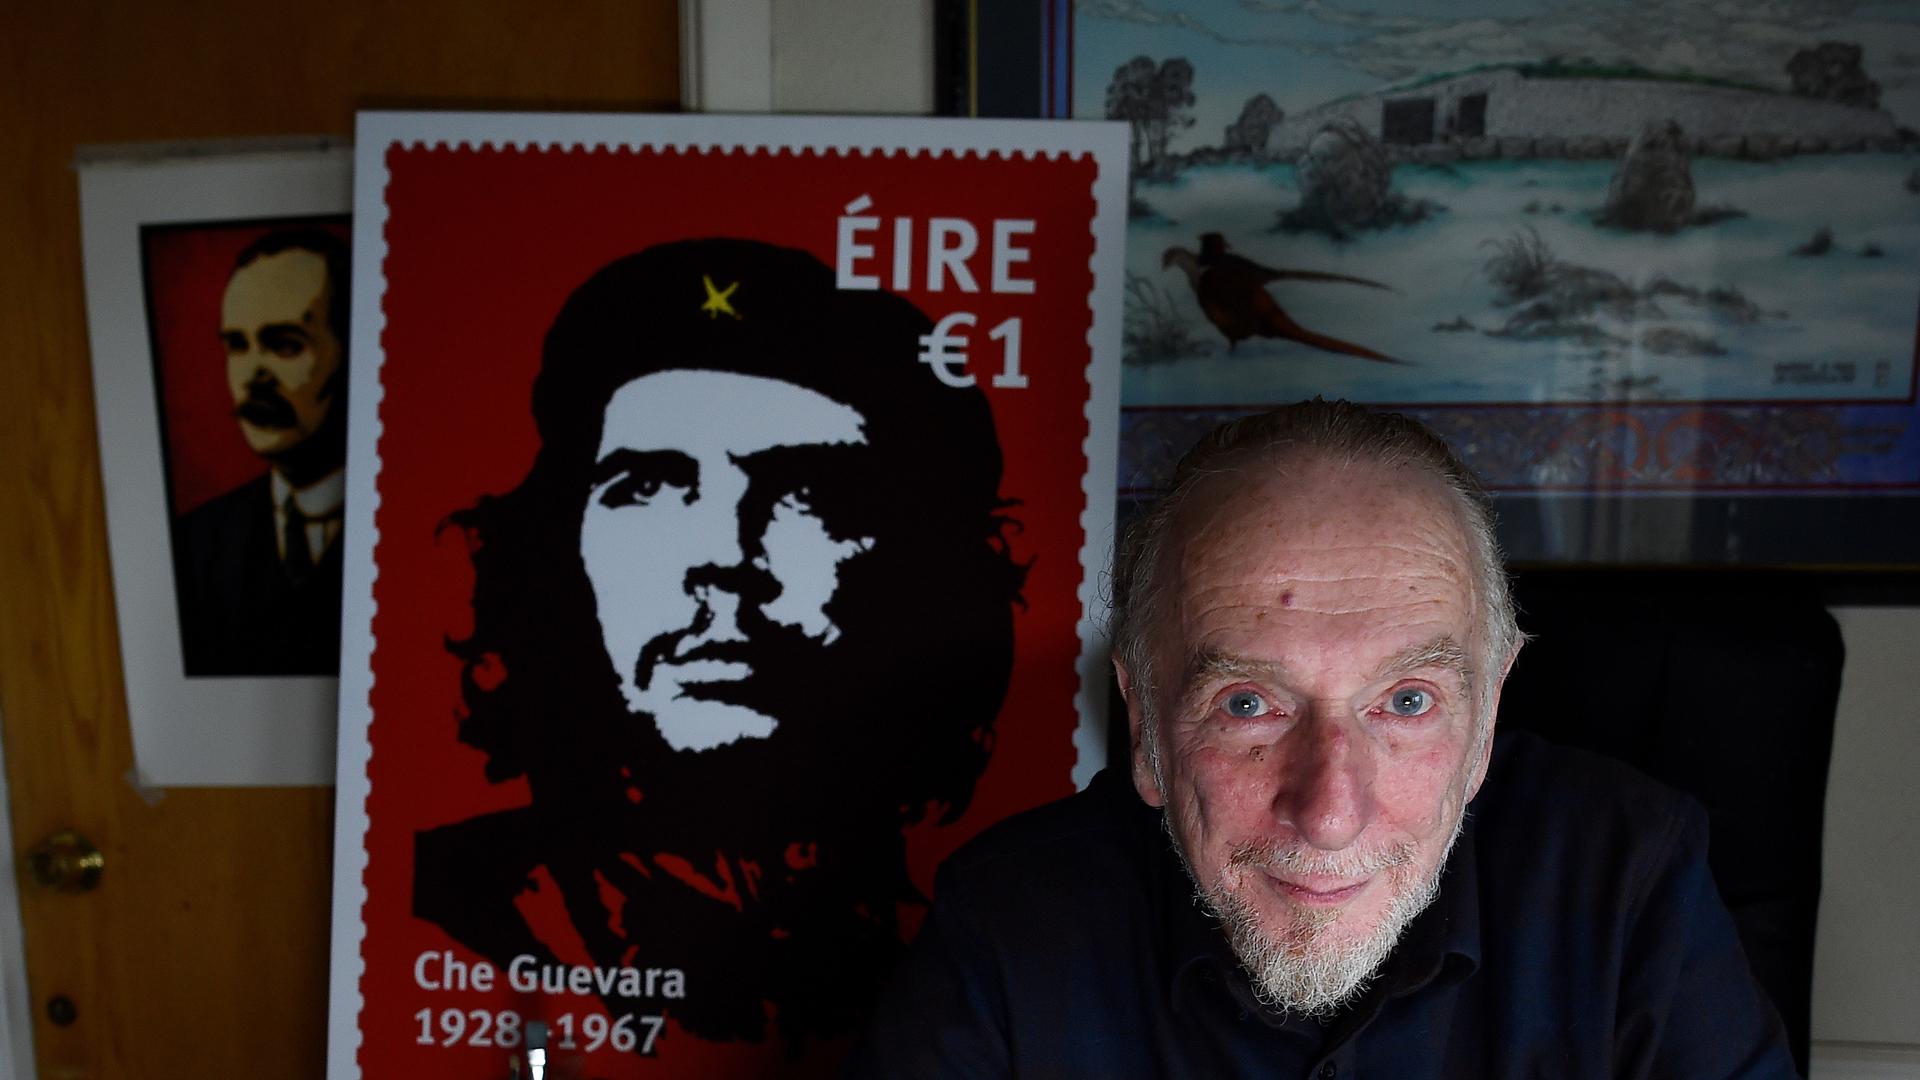 An illustration of a controversial new postage stamp in Ireland, with Irish artist, Jim Fitzpatrick, who created the famous two-tone image of Che Guevara used on the stamp